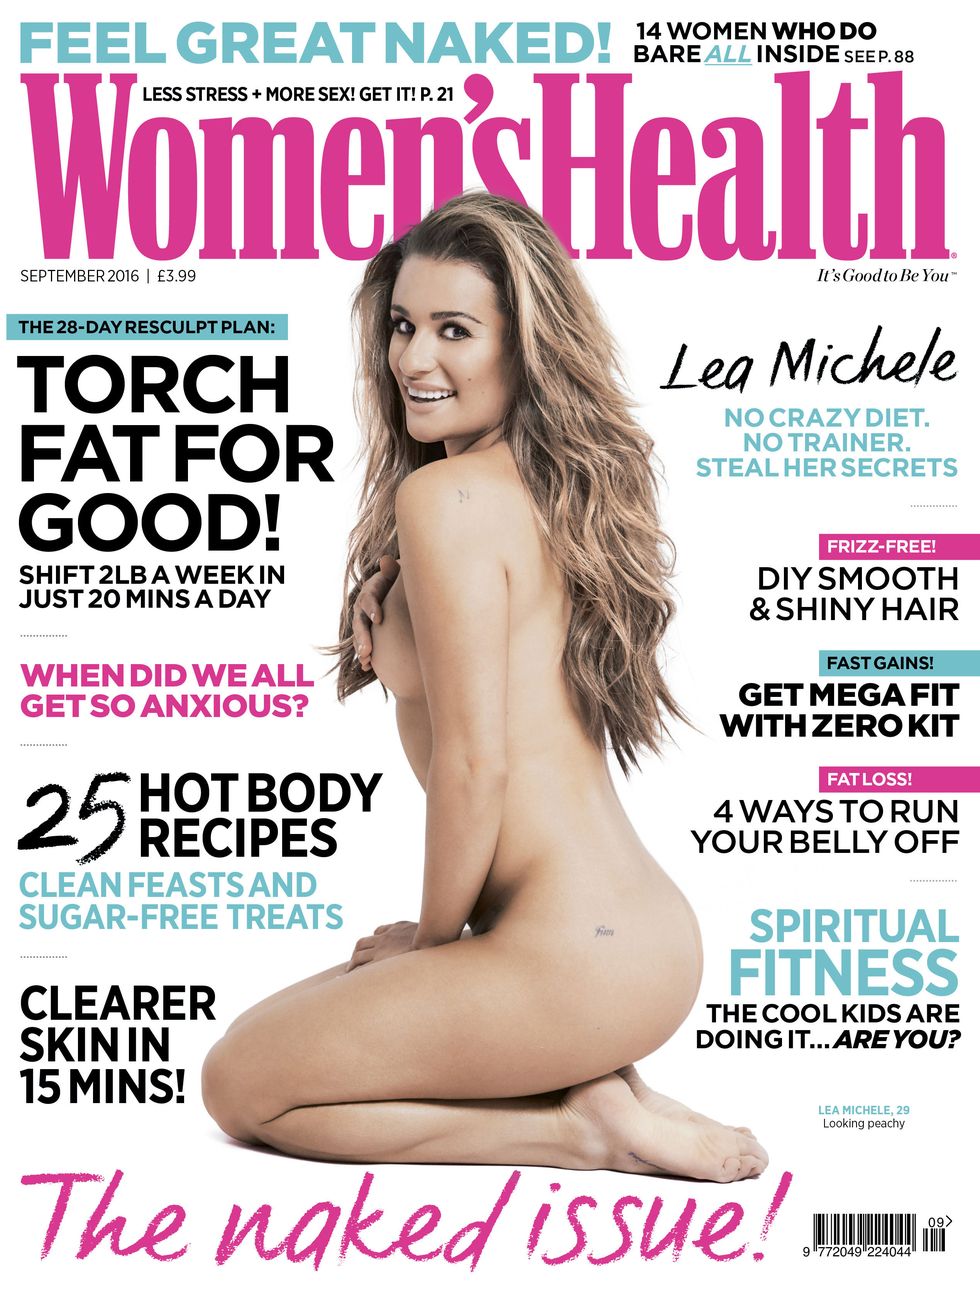 Best of Lea michele naked